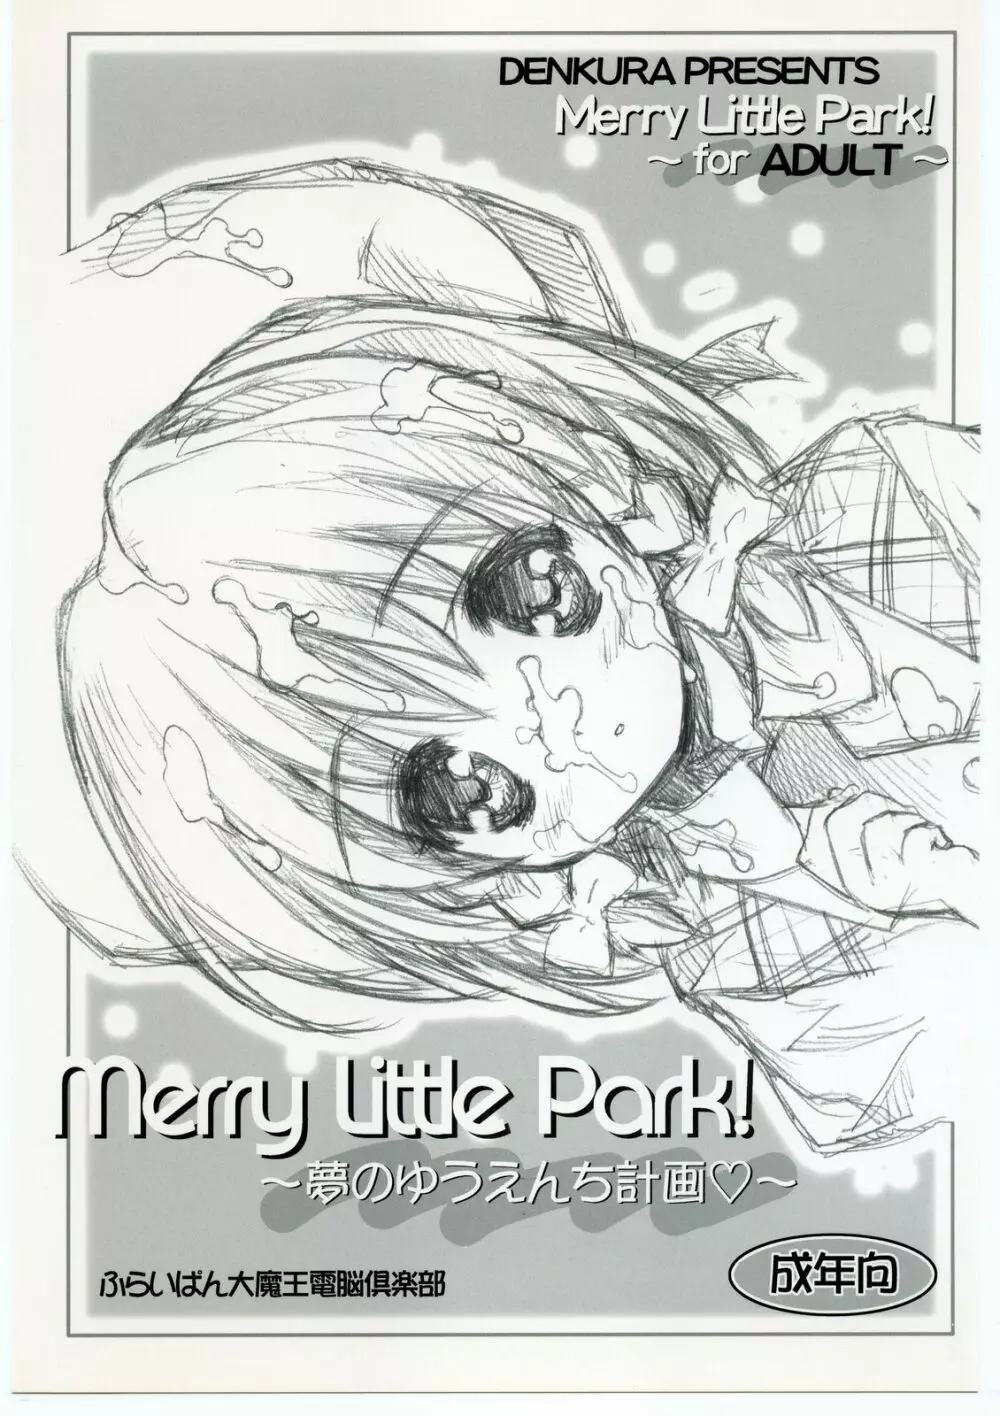 Merry Little Park! ～夢のゆうえんち計画～